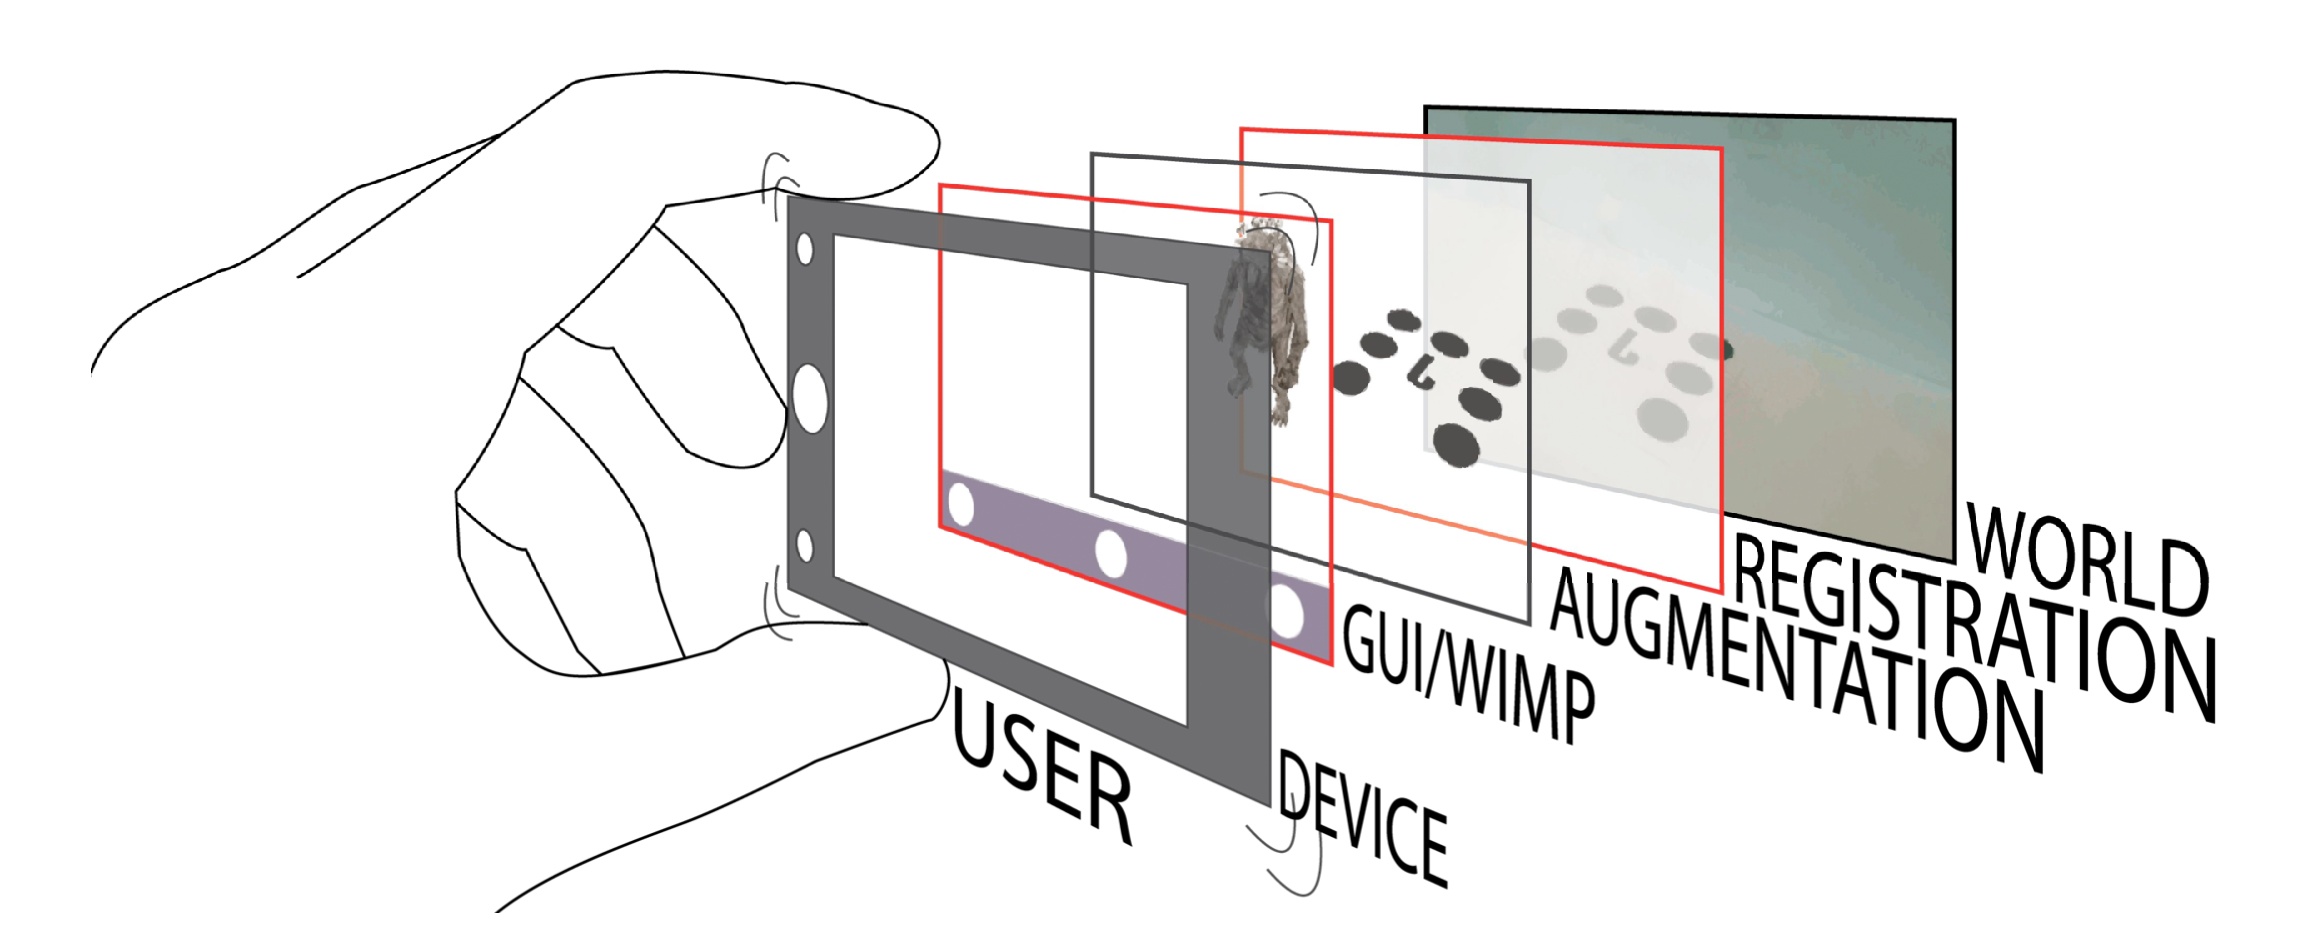 A taxonomy of handheld augmented reality applications